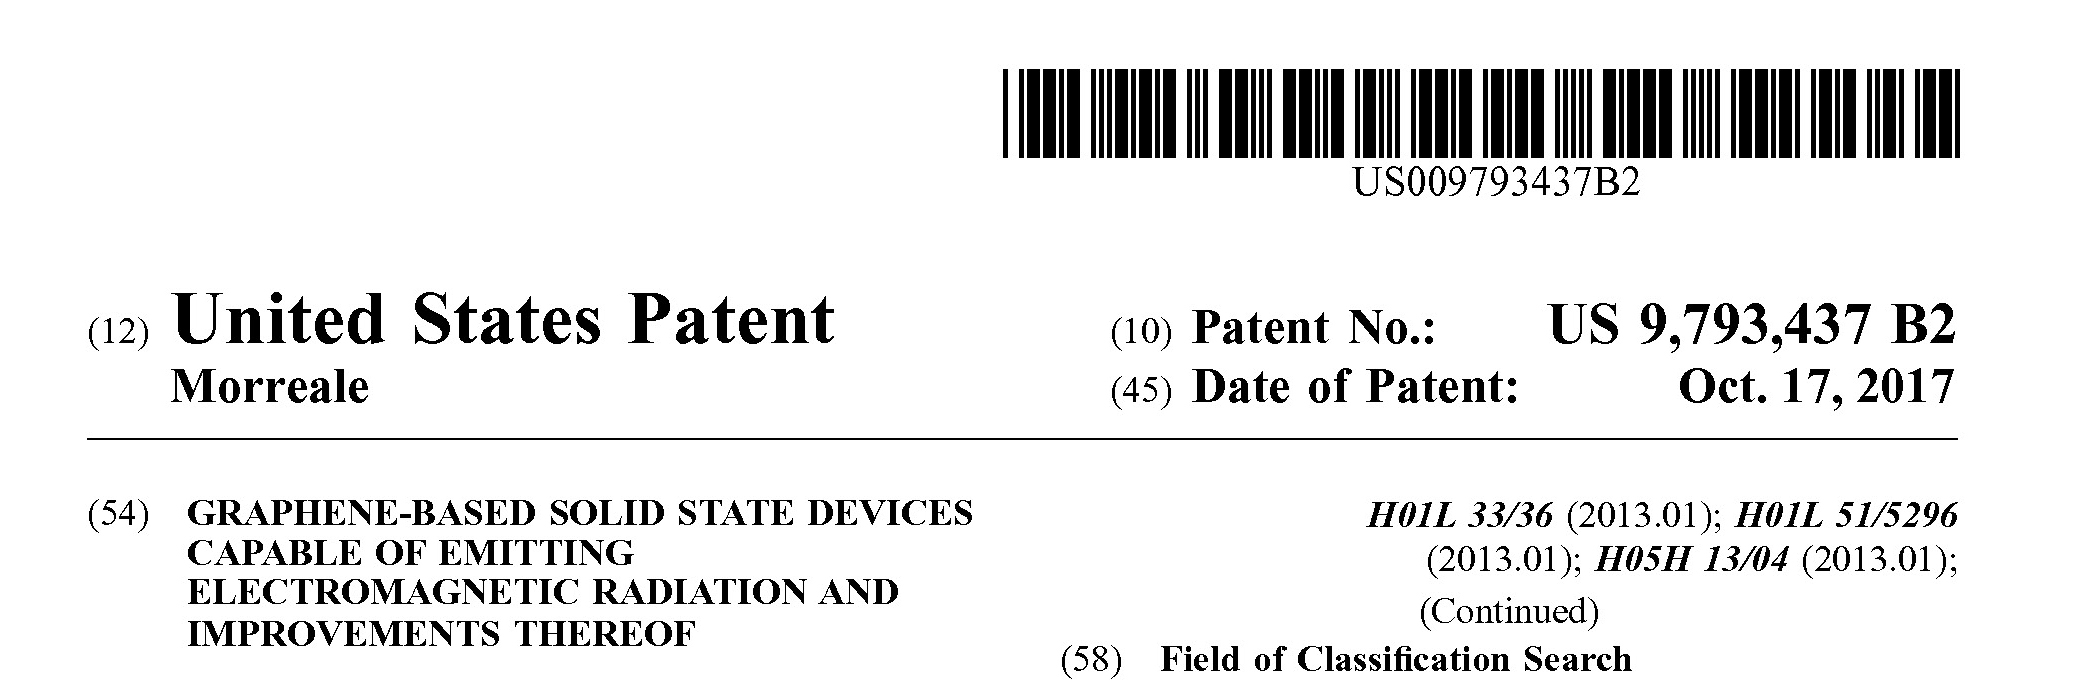 Patents represent the symbol of innovation for entrepreneurs and inventors.